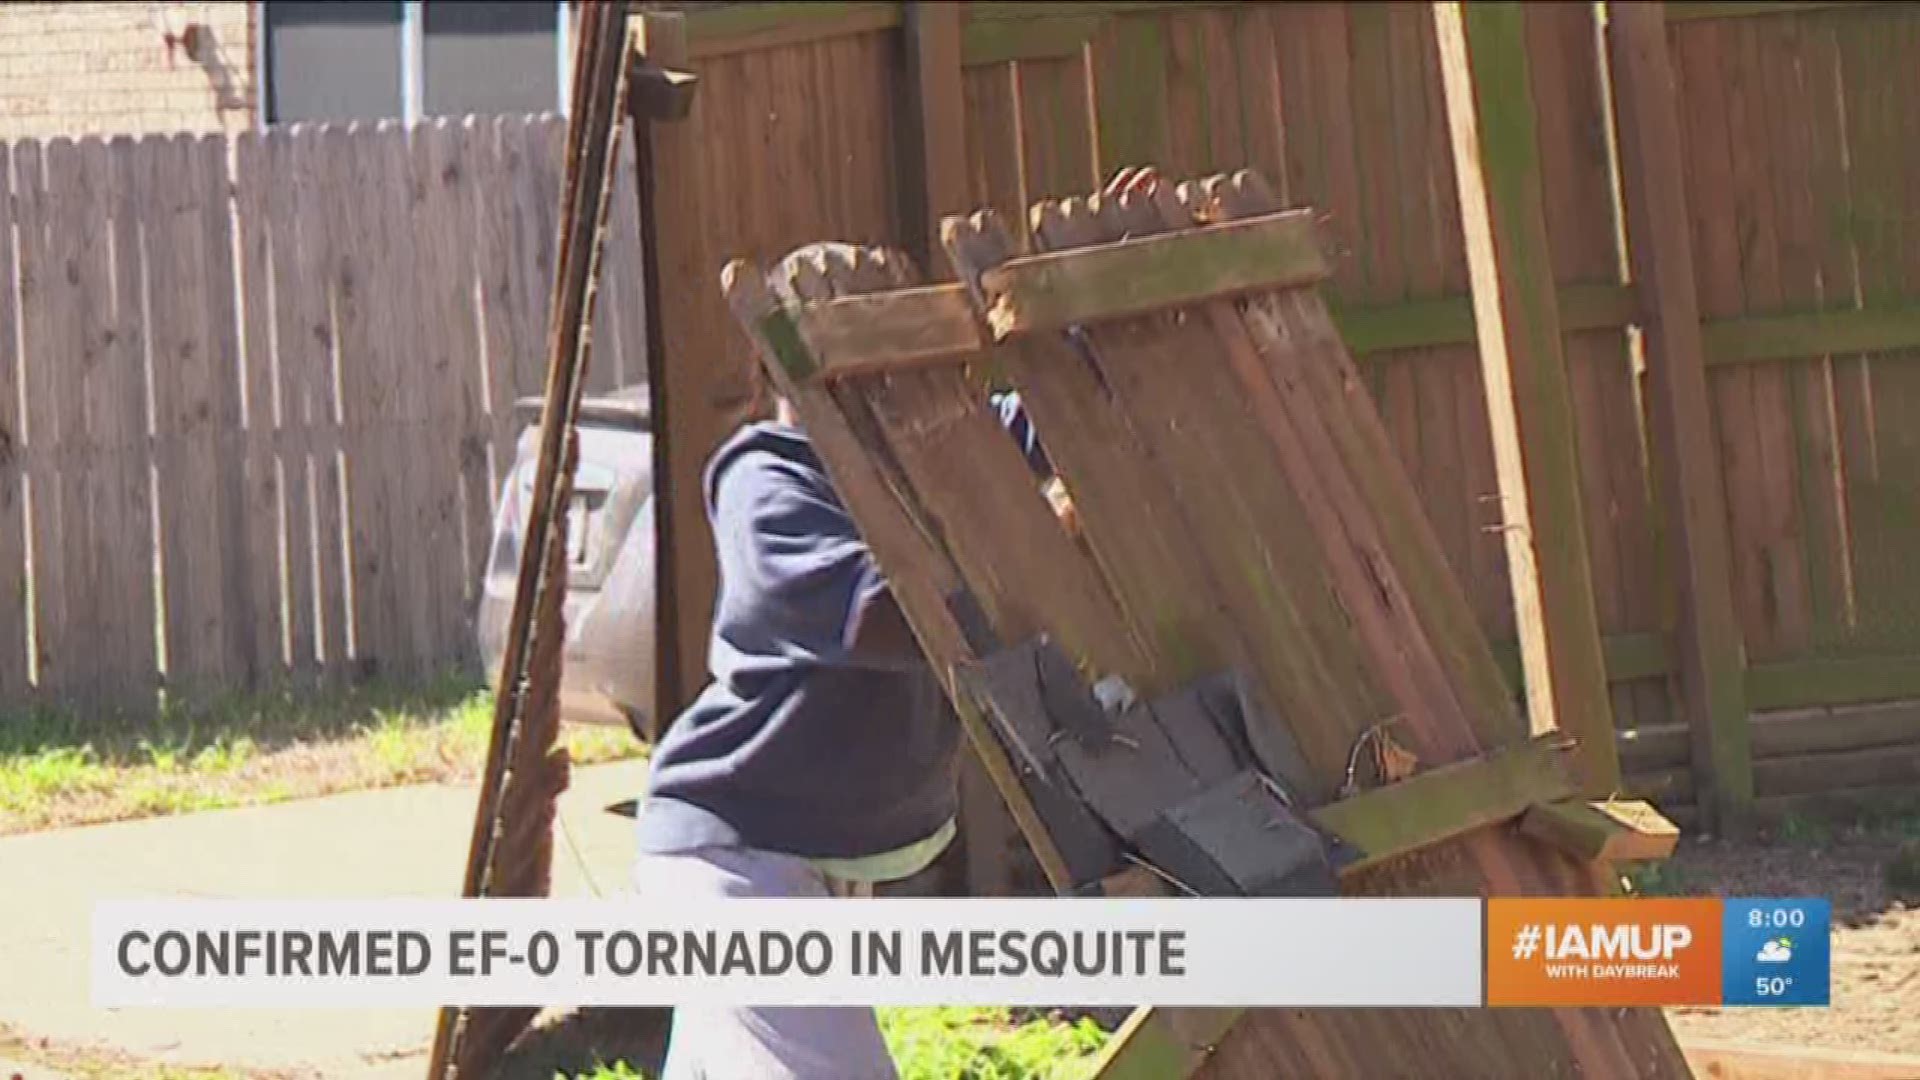 There was a severe thunderstorm warning, but no tornado warning. Saturday's storm was categorized as an EF-0 tornado.